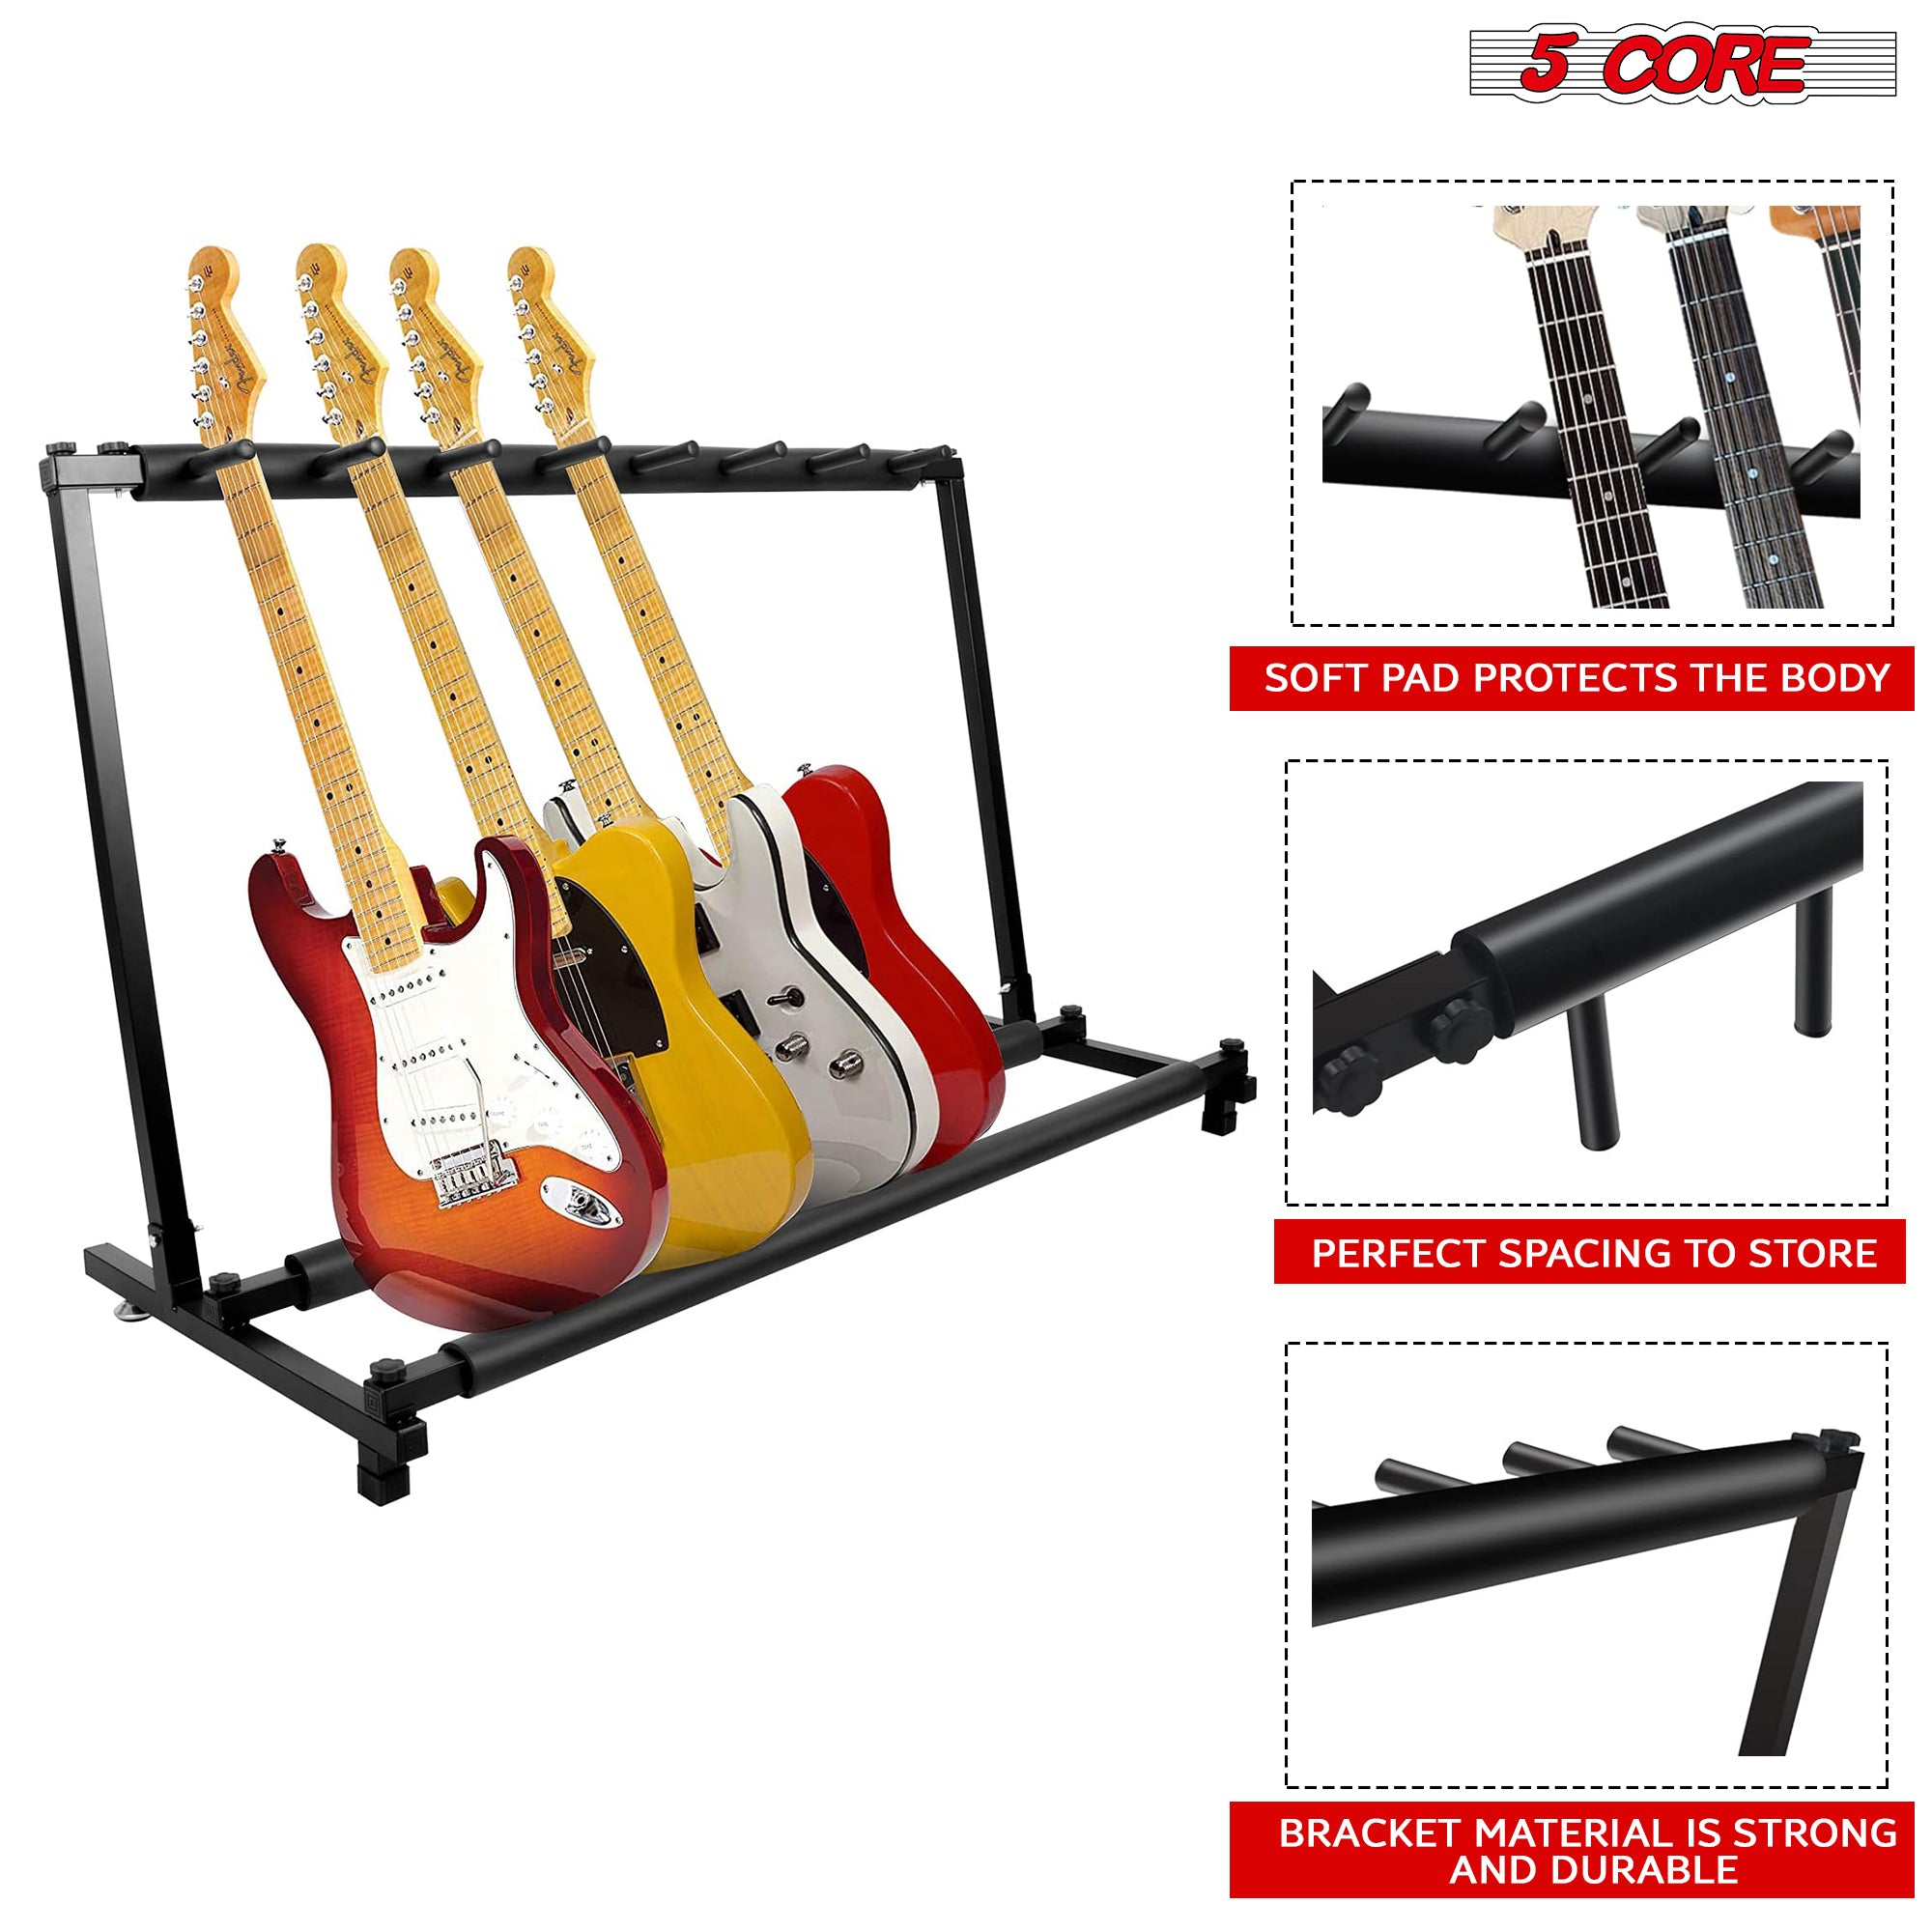 5 Core Guitar Stand 7 Space Rack for Acoustic Electric Bass Guitar • Foam Padded Multi Guitar Holder